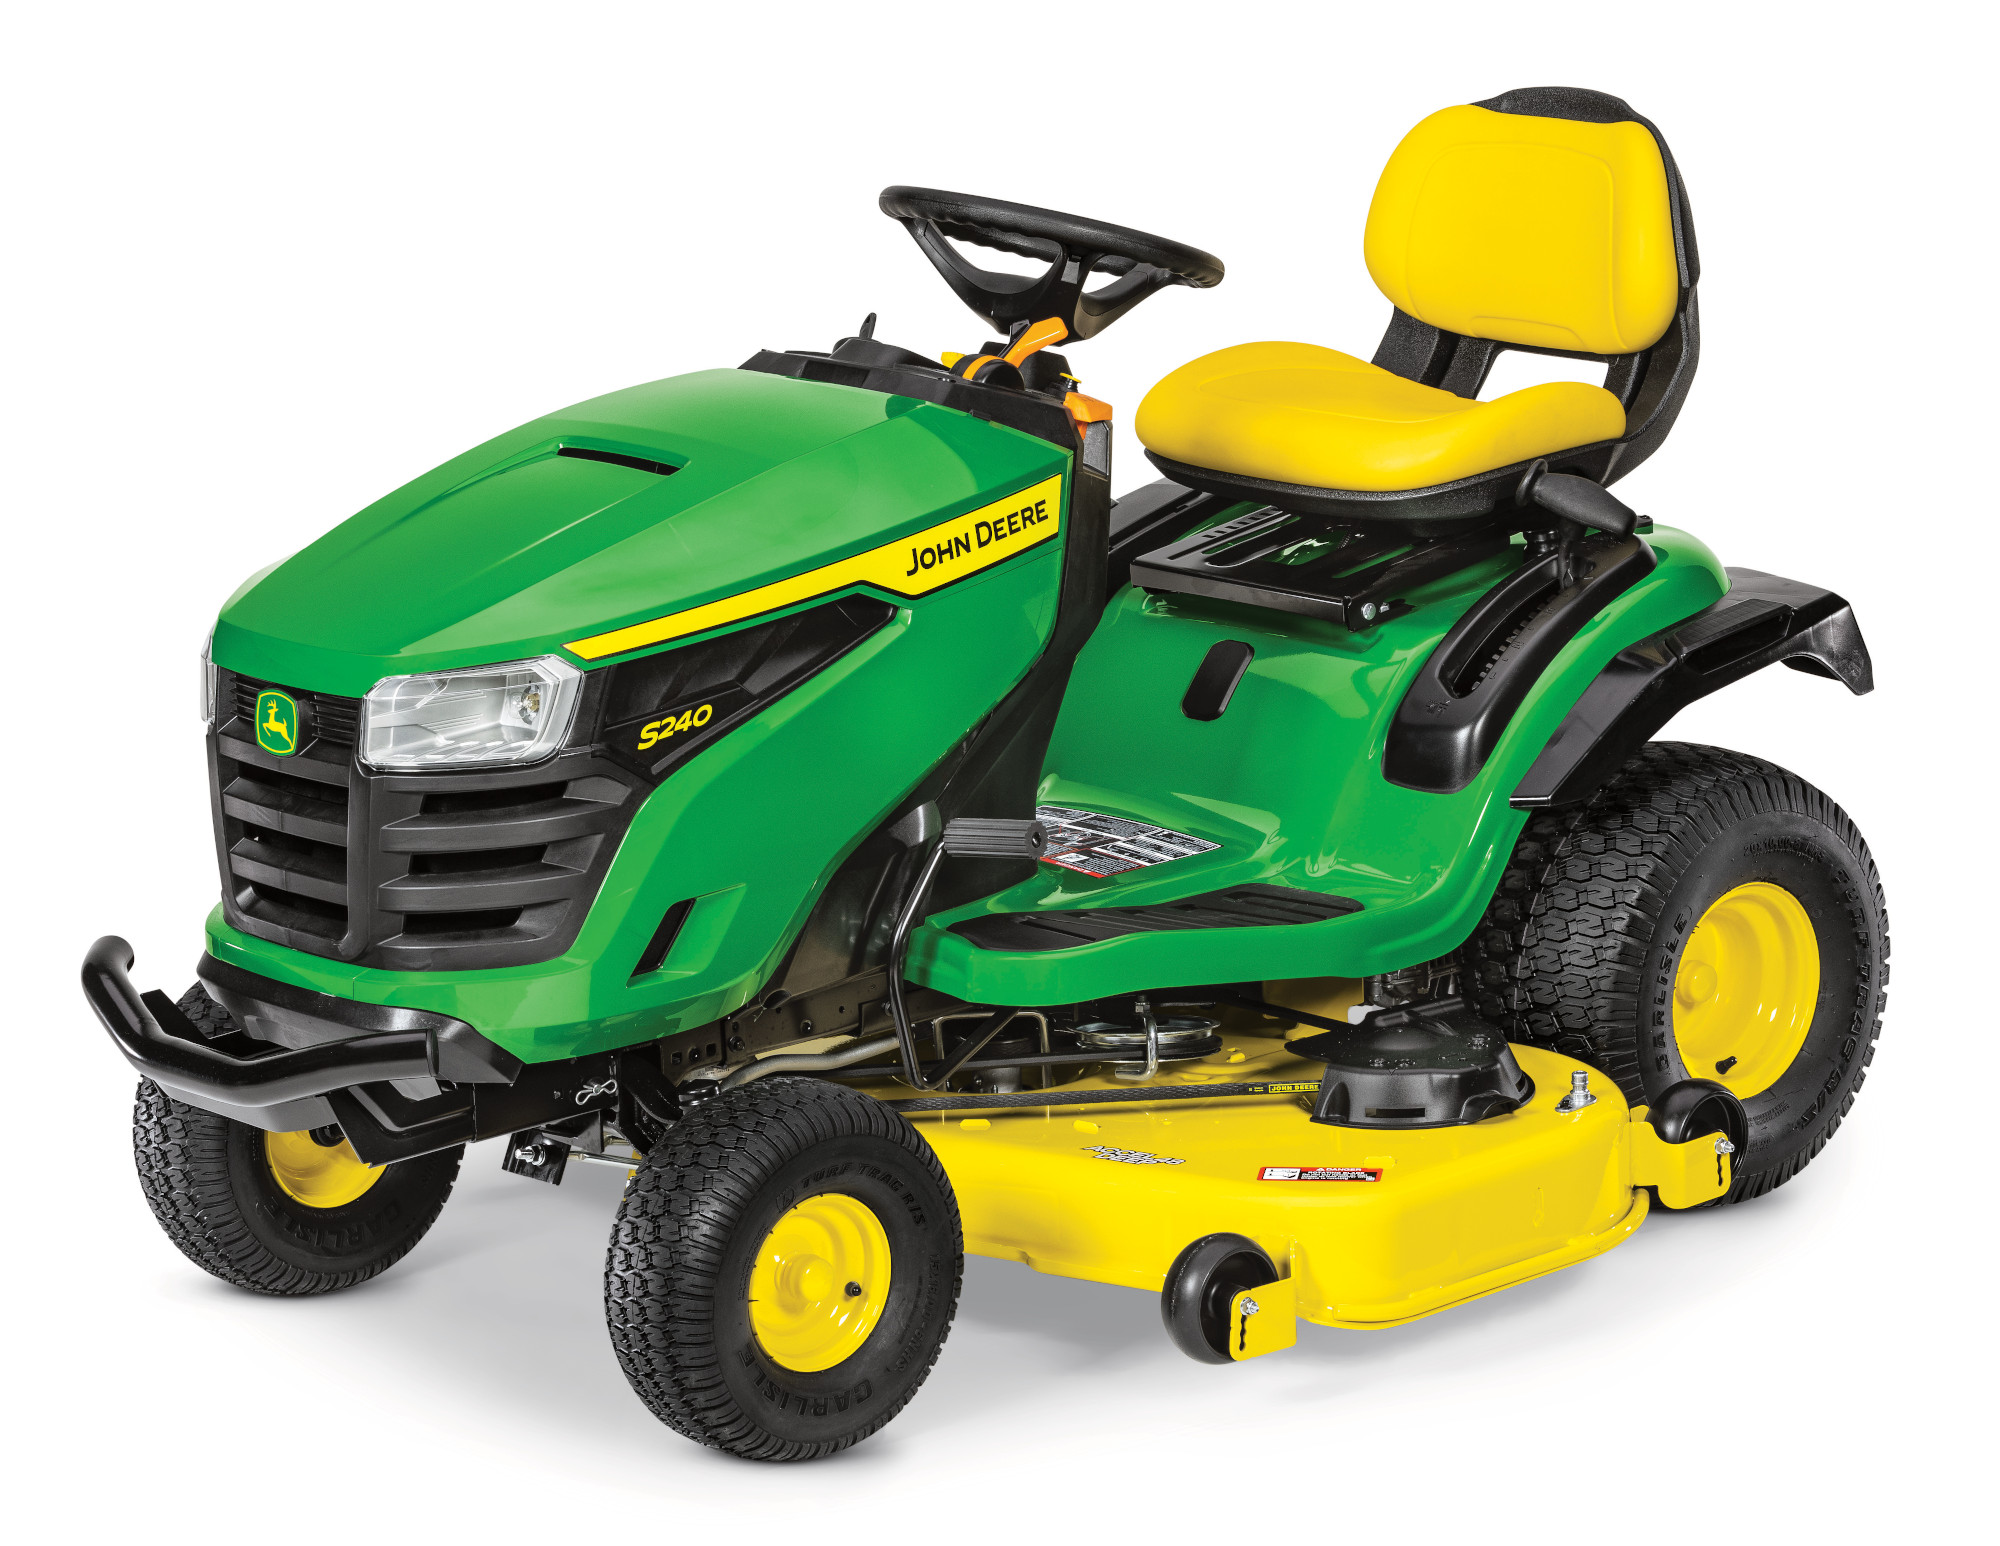 S240 Lawn Tractor with 48-inch Deck